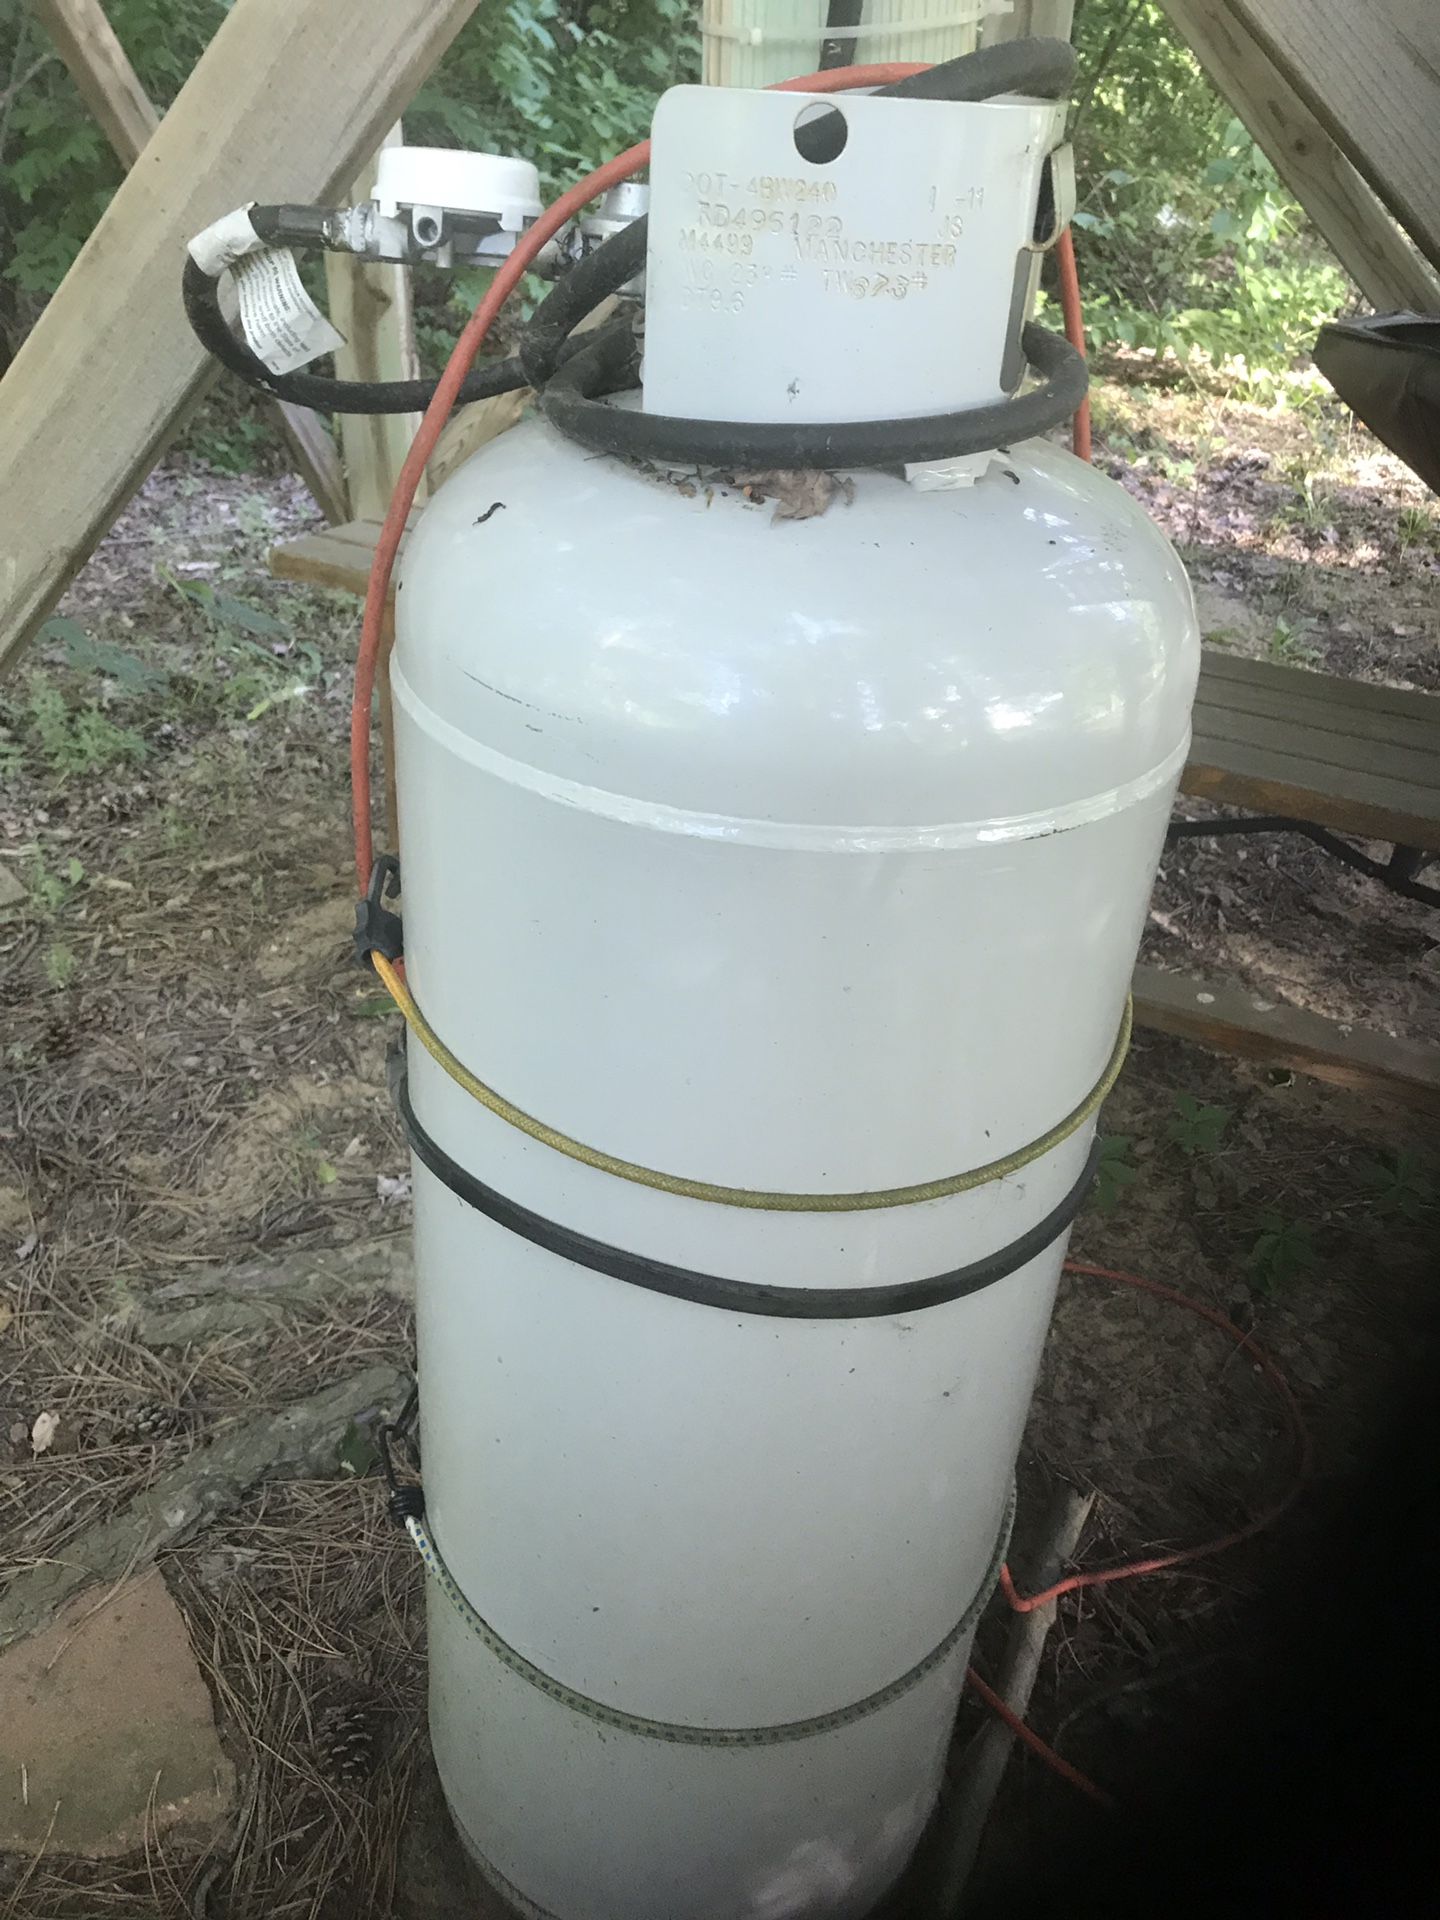 Large propane tank used to heat a small garage or shed